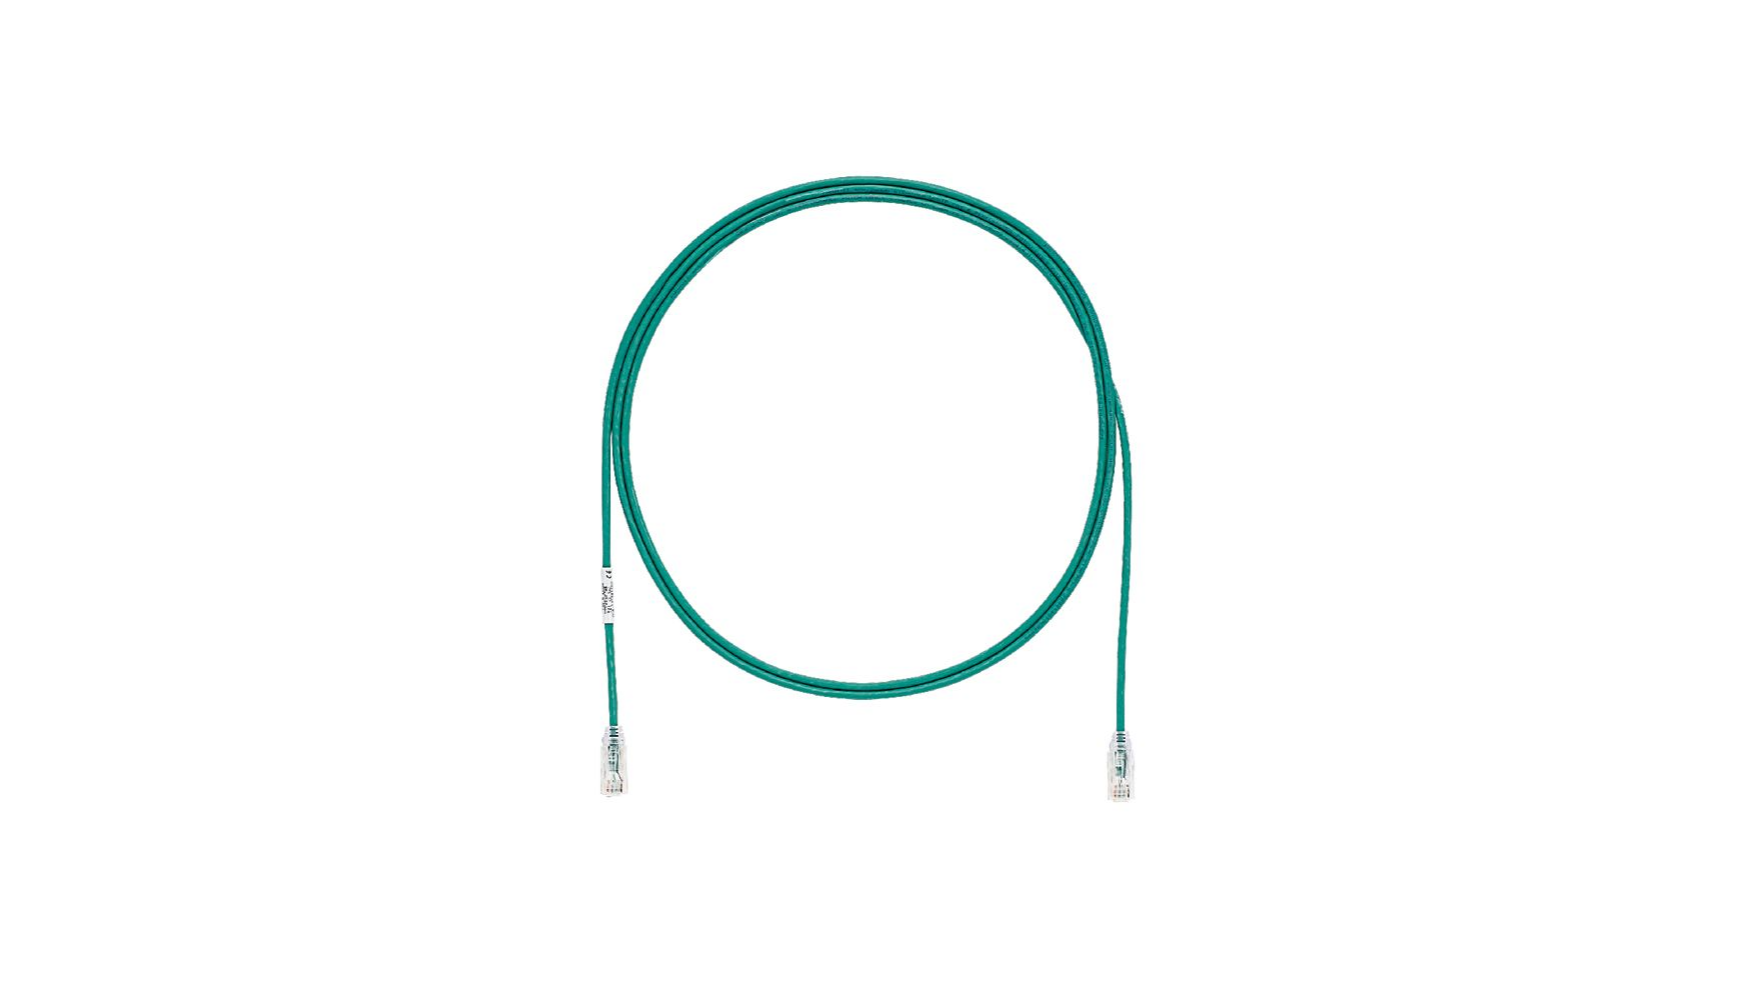 Panduit Copper Patch Cord, Cat 6, AWG 28, Green UTP Cable, 1 m